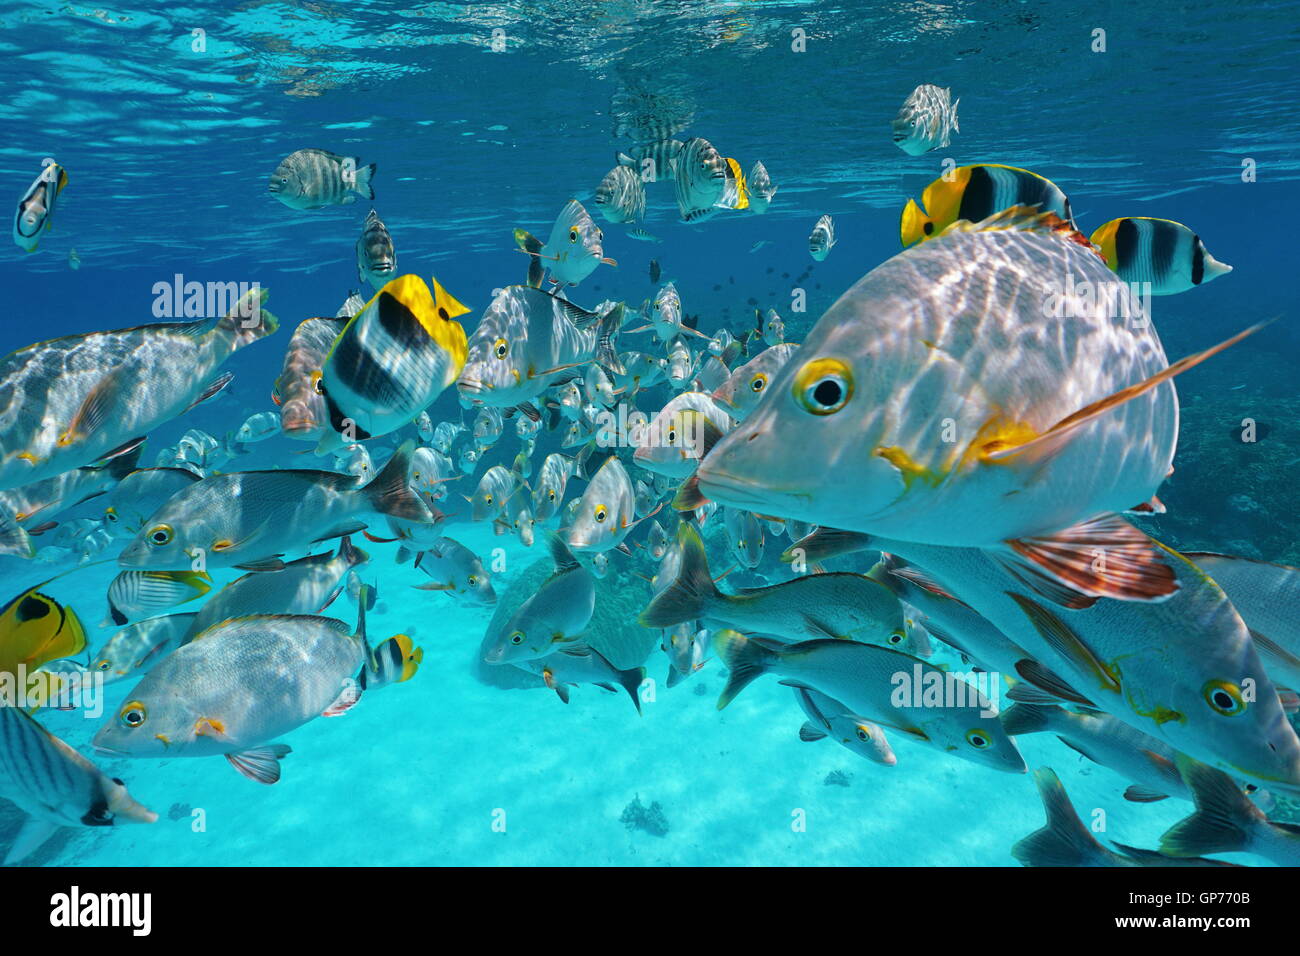 Shoal of tropical fish, mostly humpback red snapper with some butterflyfish and damselfish, Pacific ocean, French Polynesia Stock Photo